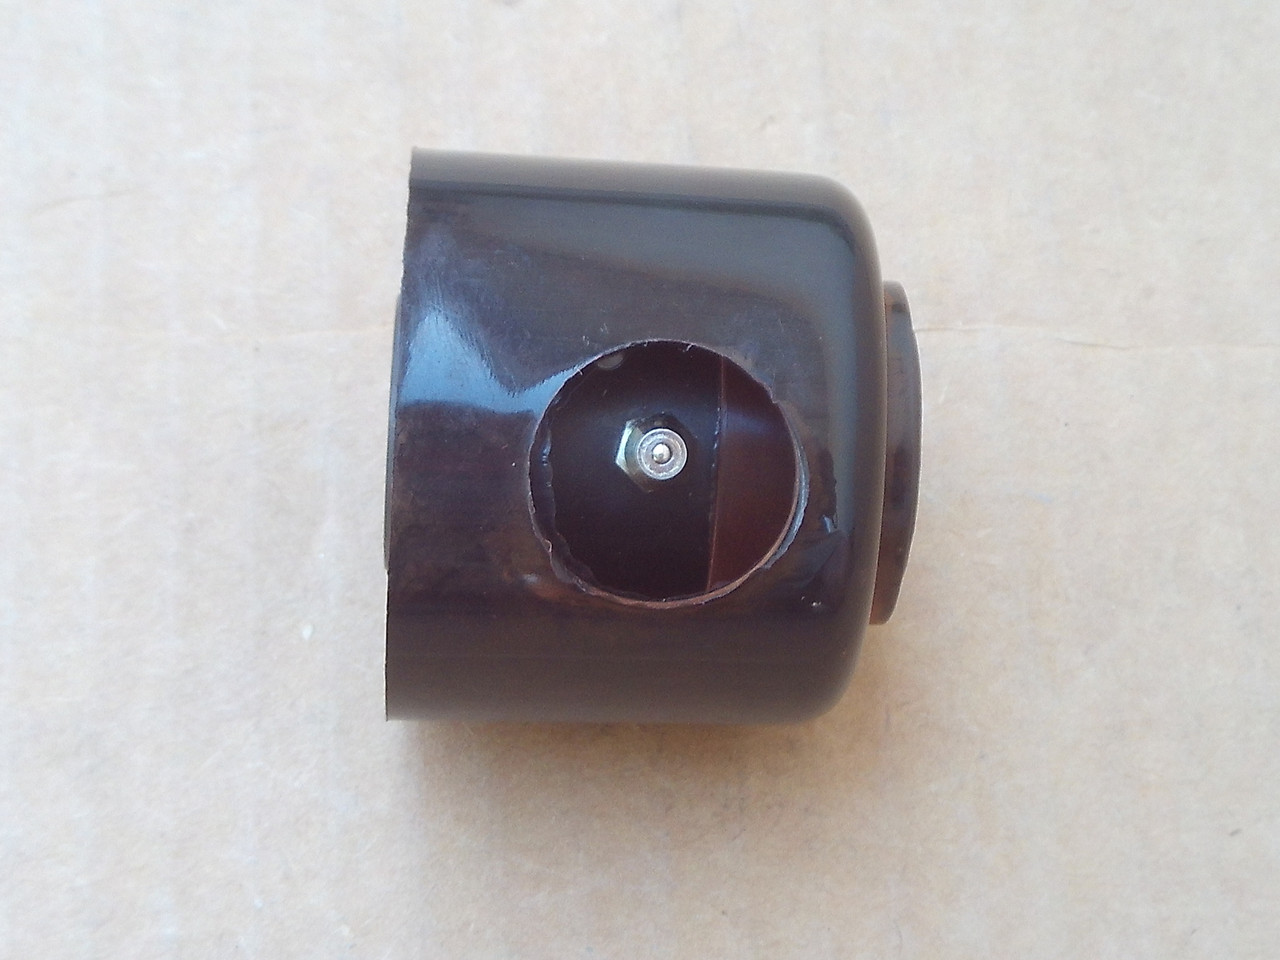 Transmission Drive Shaft Coupler for Ariens 049012, 04901200, 08880500